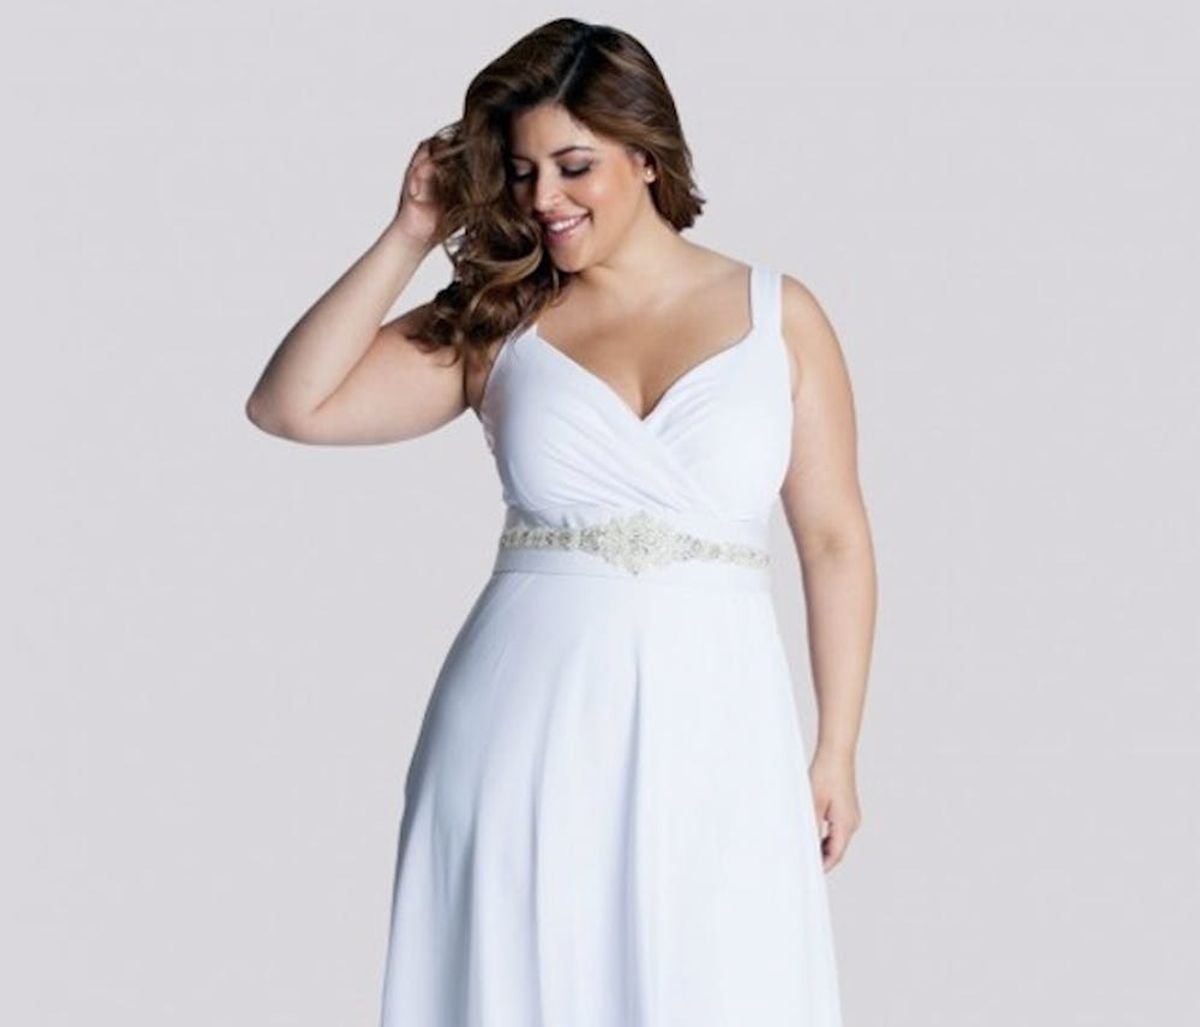 The 10 Best Brands for Plus-Size Wedding Dresses